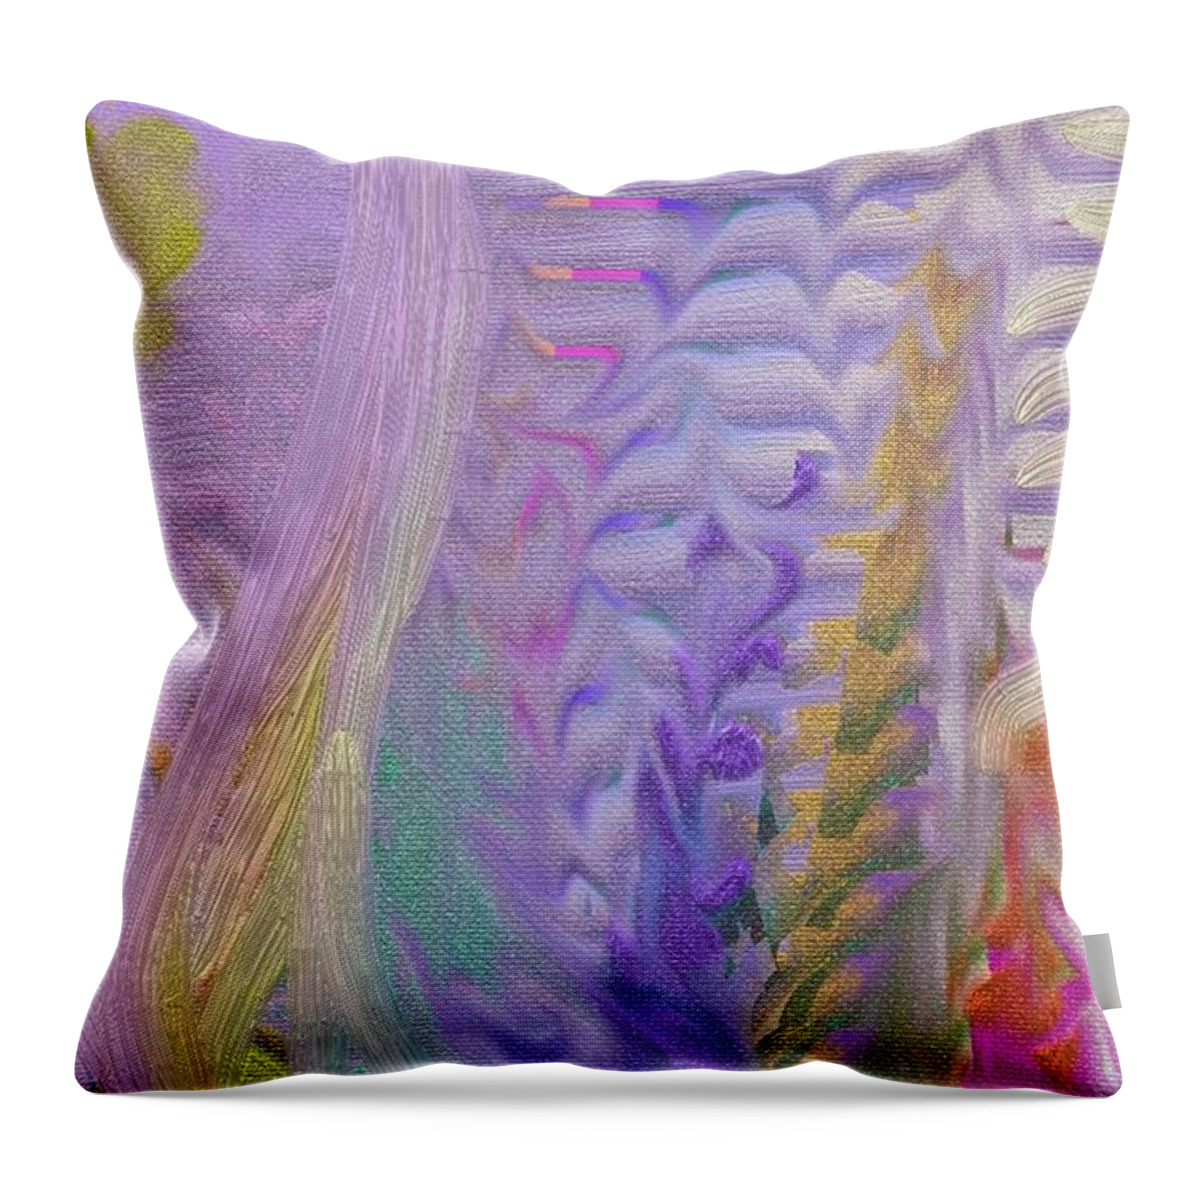 Abstract Throw Pillow featuring the painting Whirlwind by Naomi Jacobs